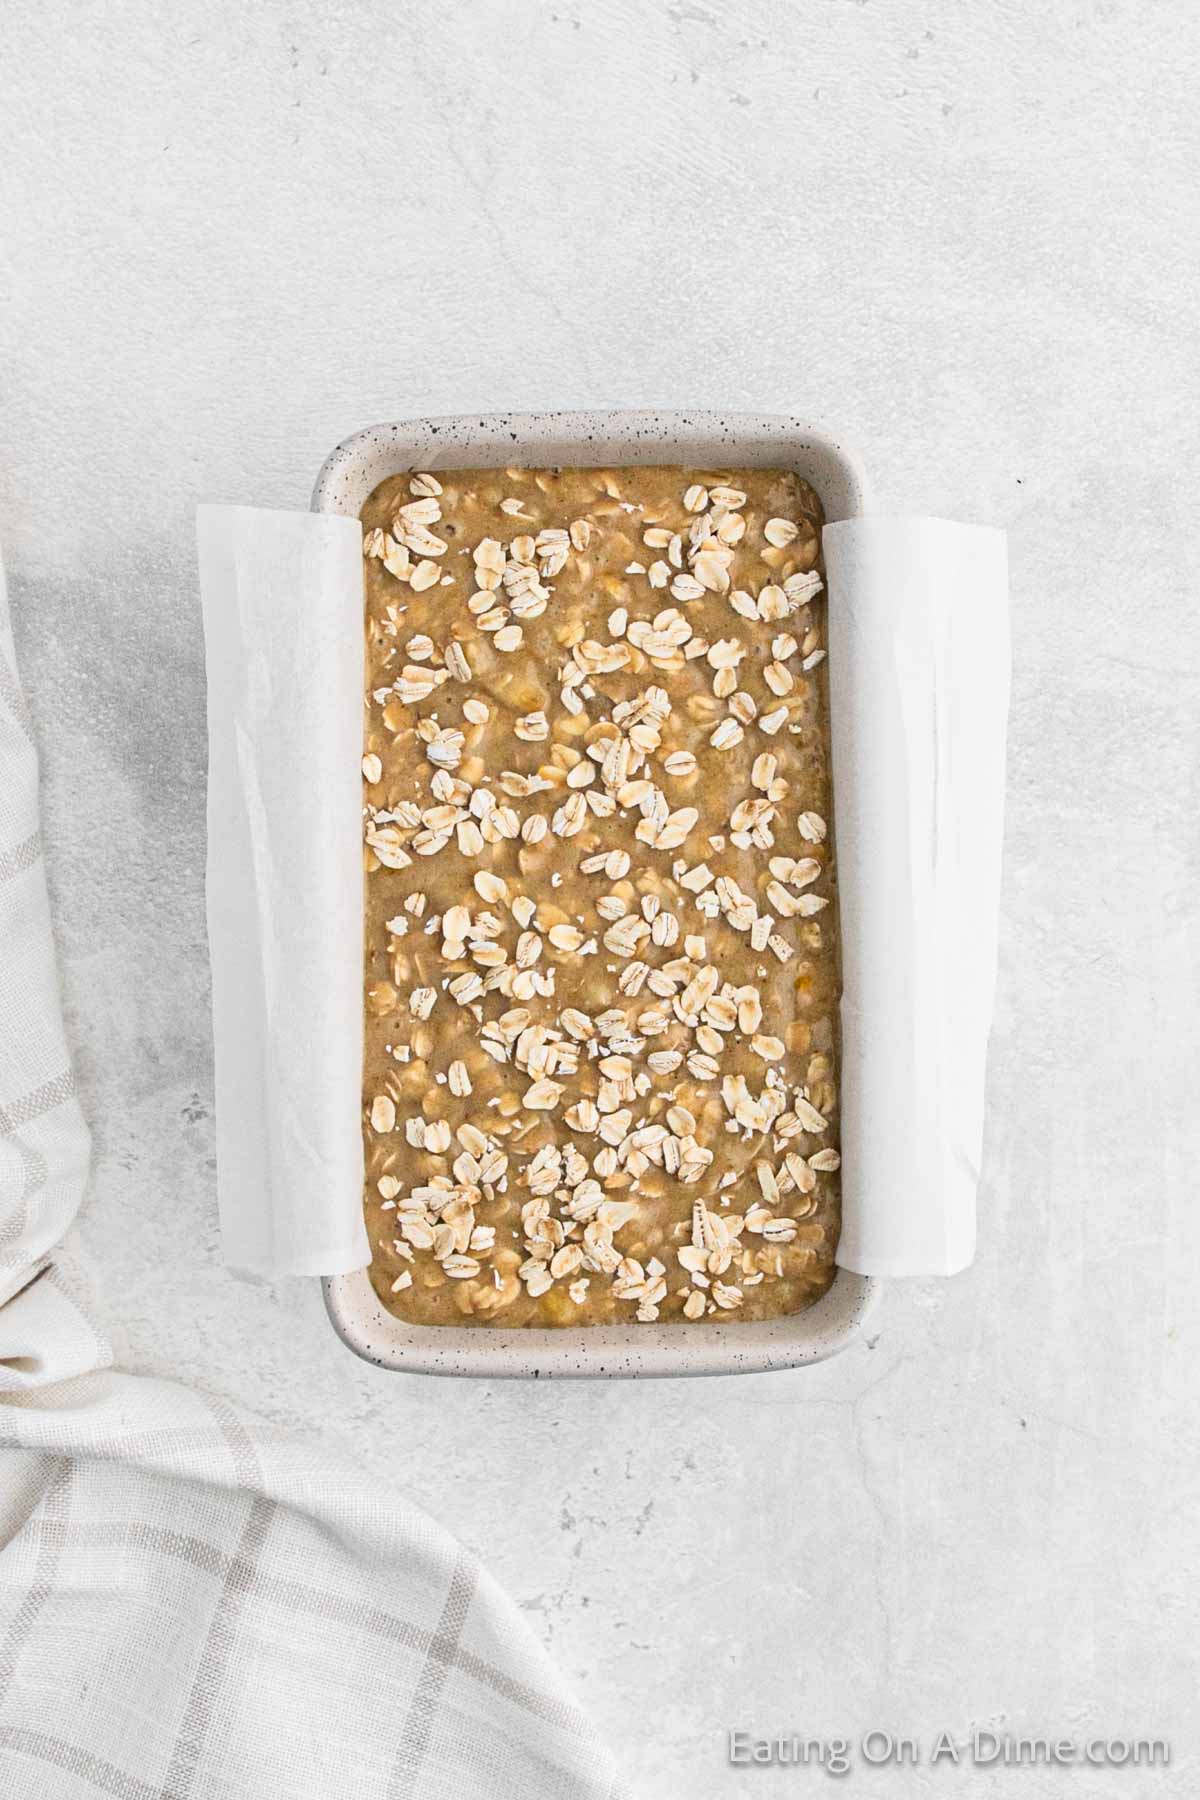 Topping bread batter with oats in the loaf pan